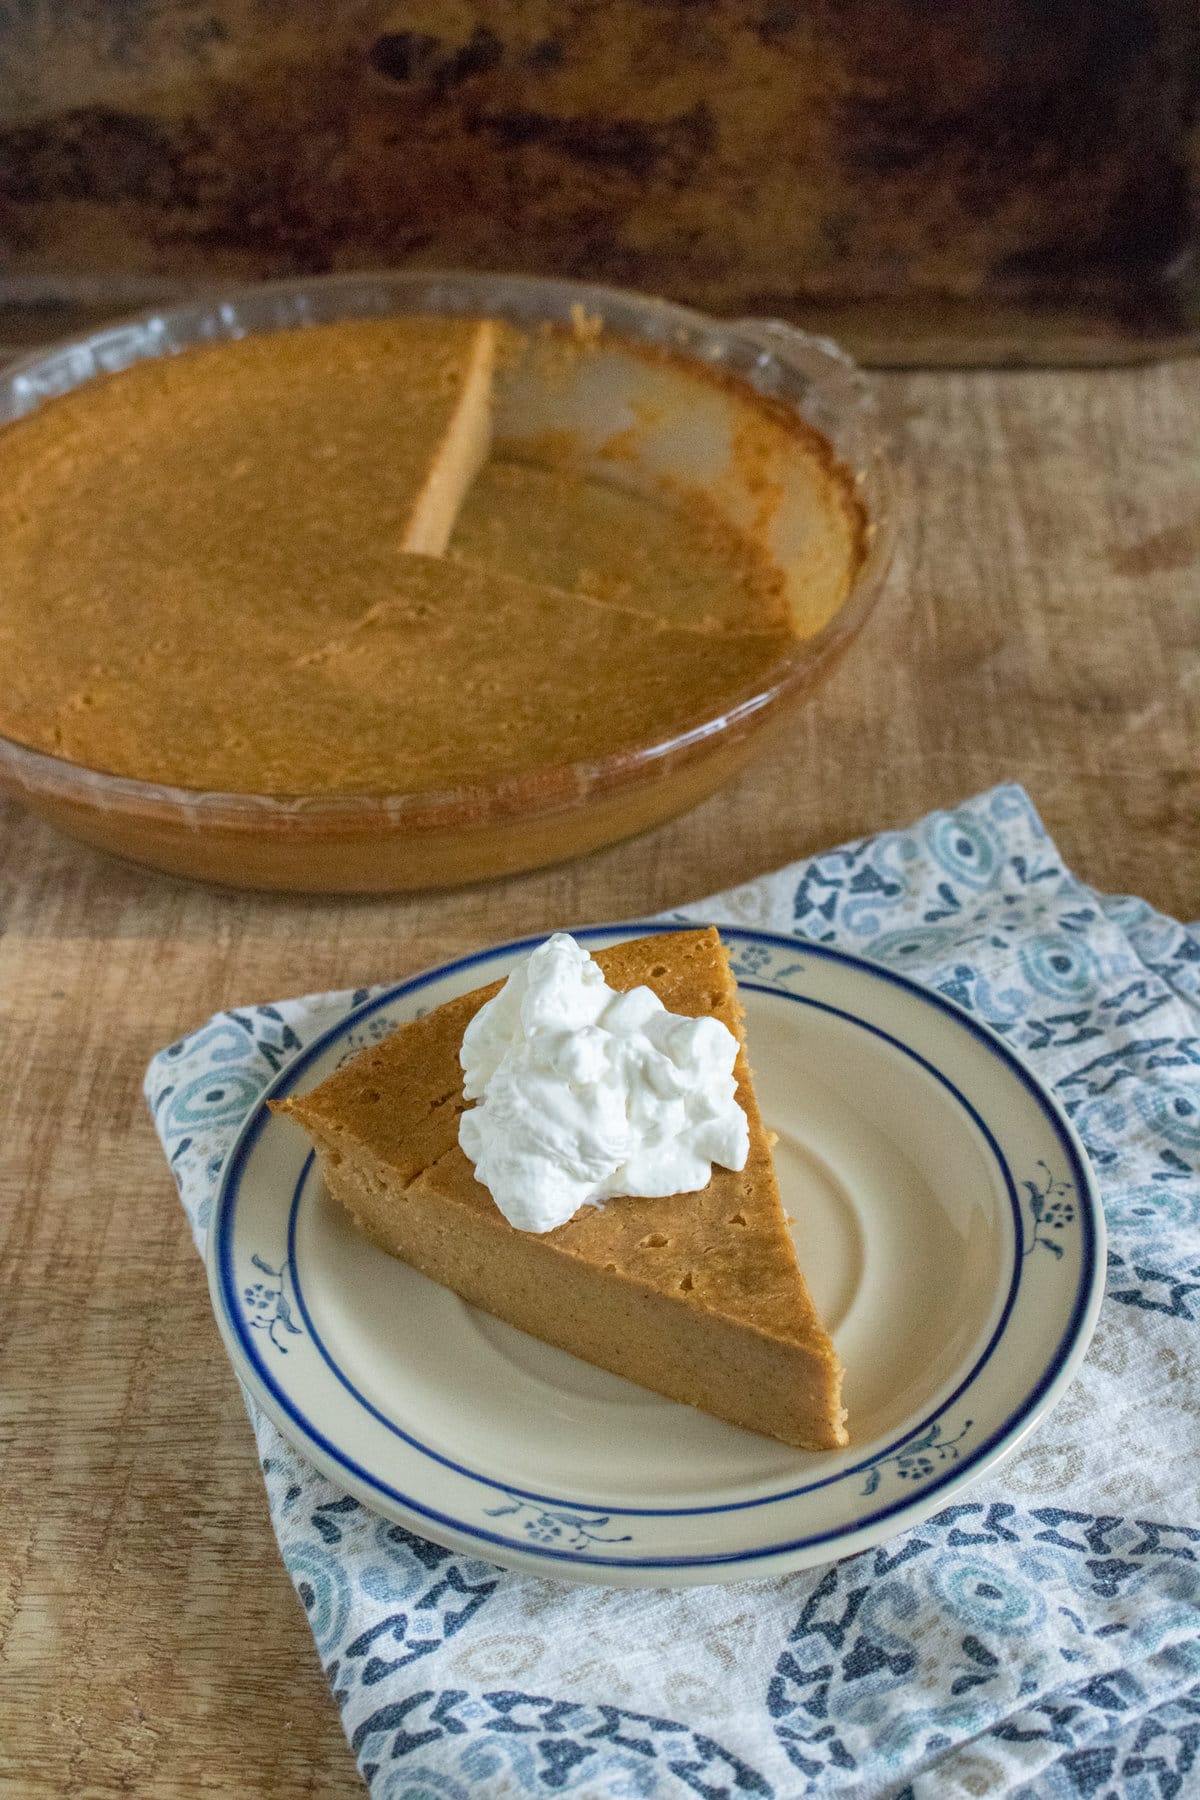 A slice of Crustless Pumpkin Pie topped with whipped cream on a plate, next to the rest of the pie on a wooden table.